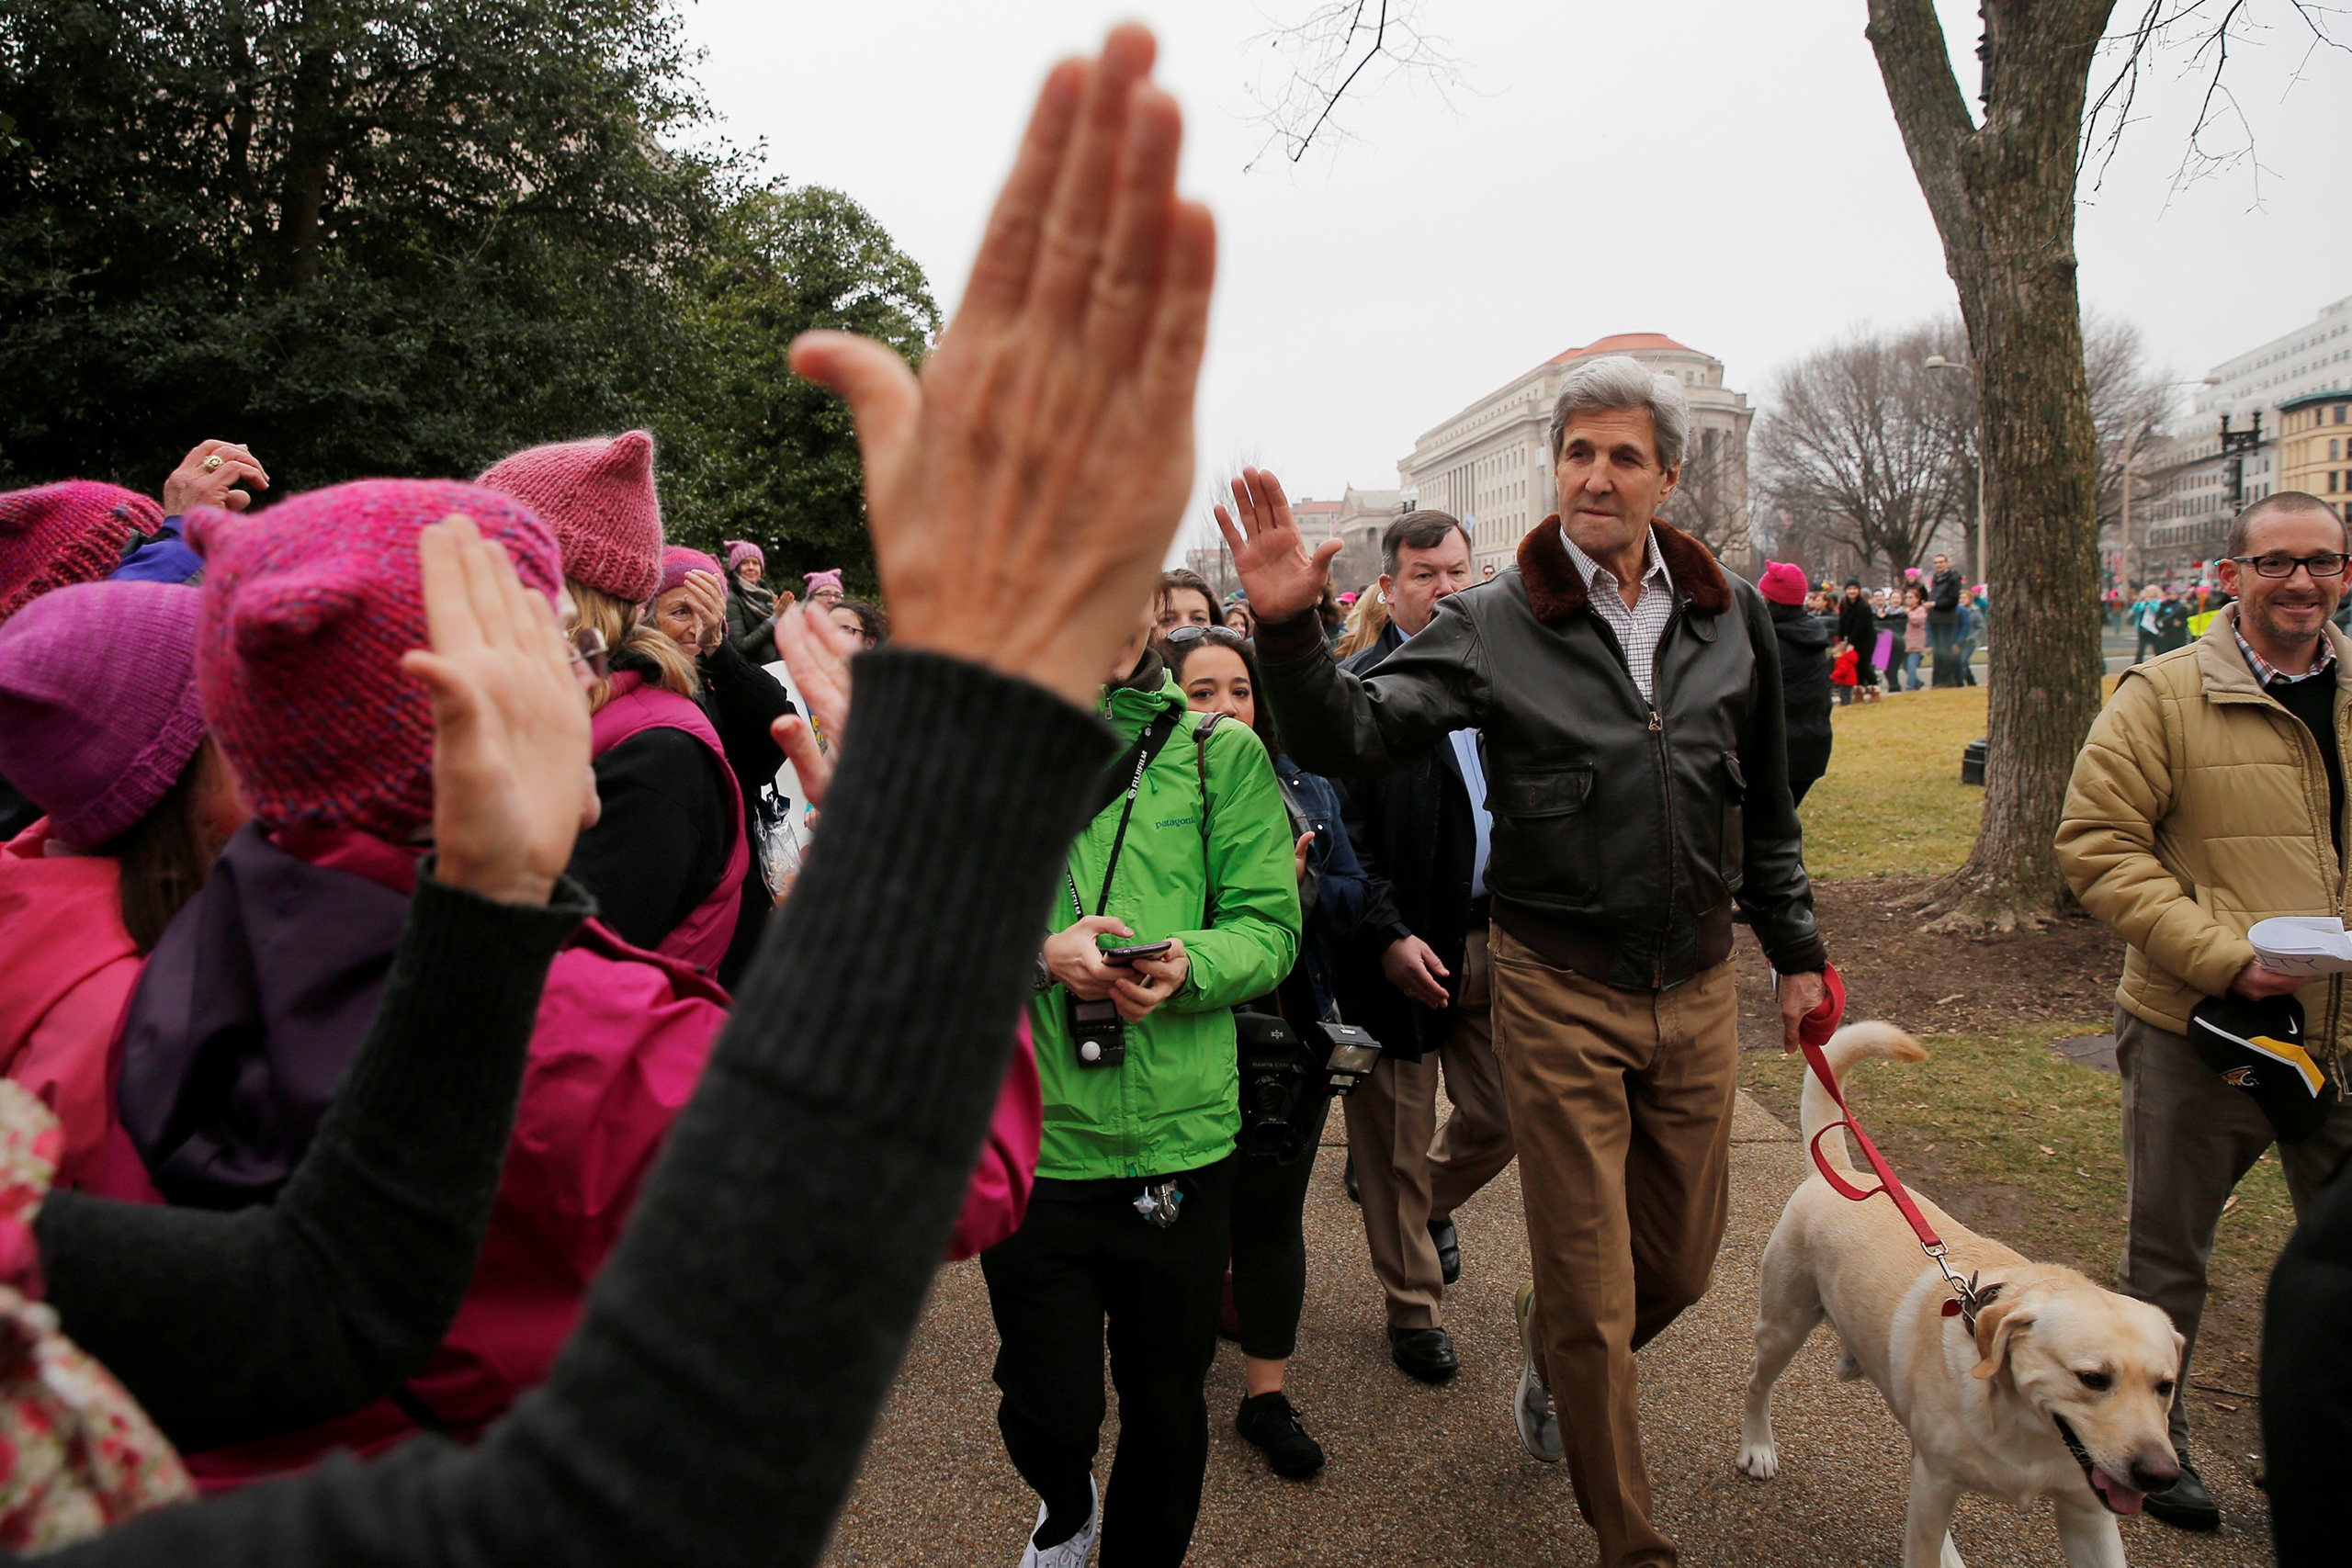 Former U.S. Secretary of State John Kerry walks his dog to join the Women's March on Washington, following the inauguration of U.S. President Donald Trump, on Jan. 21, 2017. (Brian Snyder—Reuters)